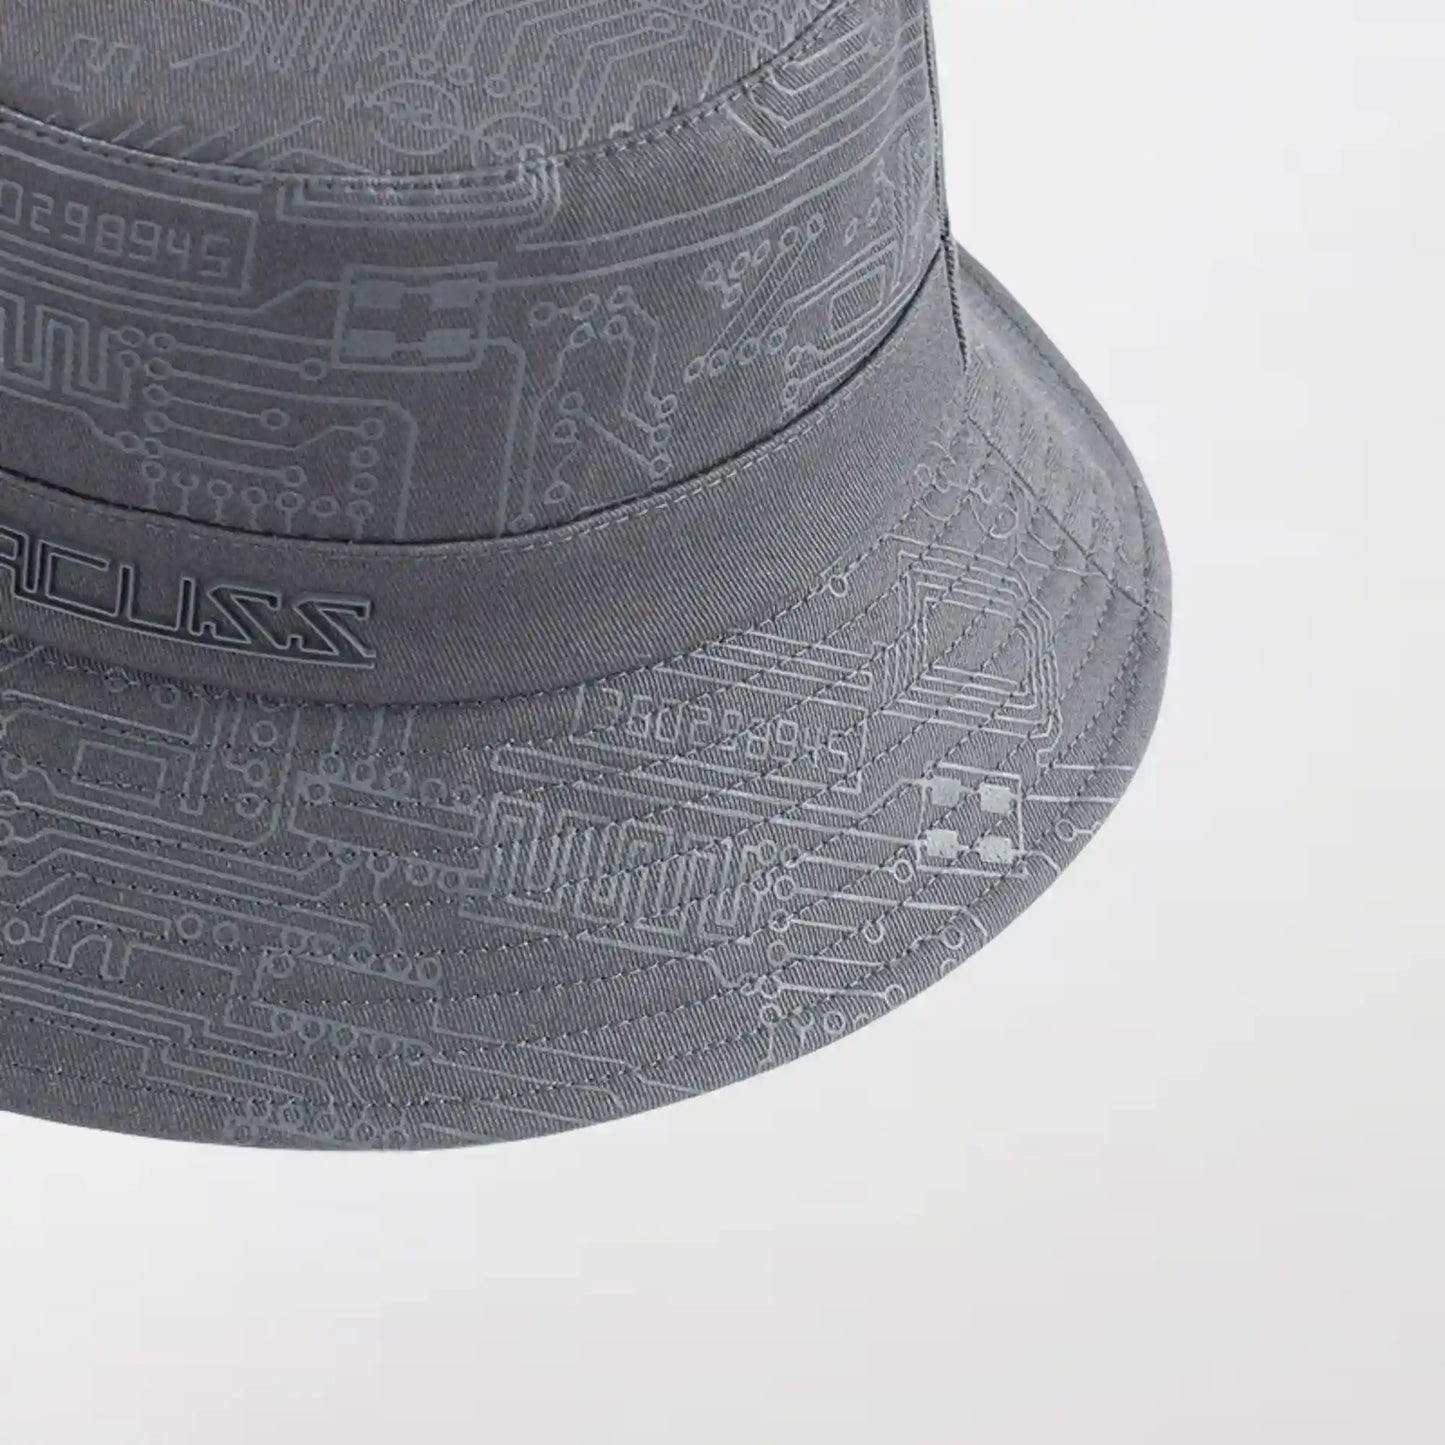 A Gray Cyberpunk Bucket Hat with a three-dimensional shape, nearly routed brim - Clotechnow.